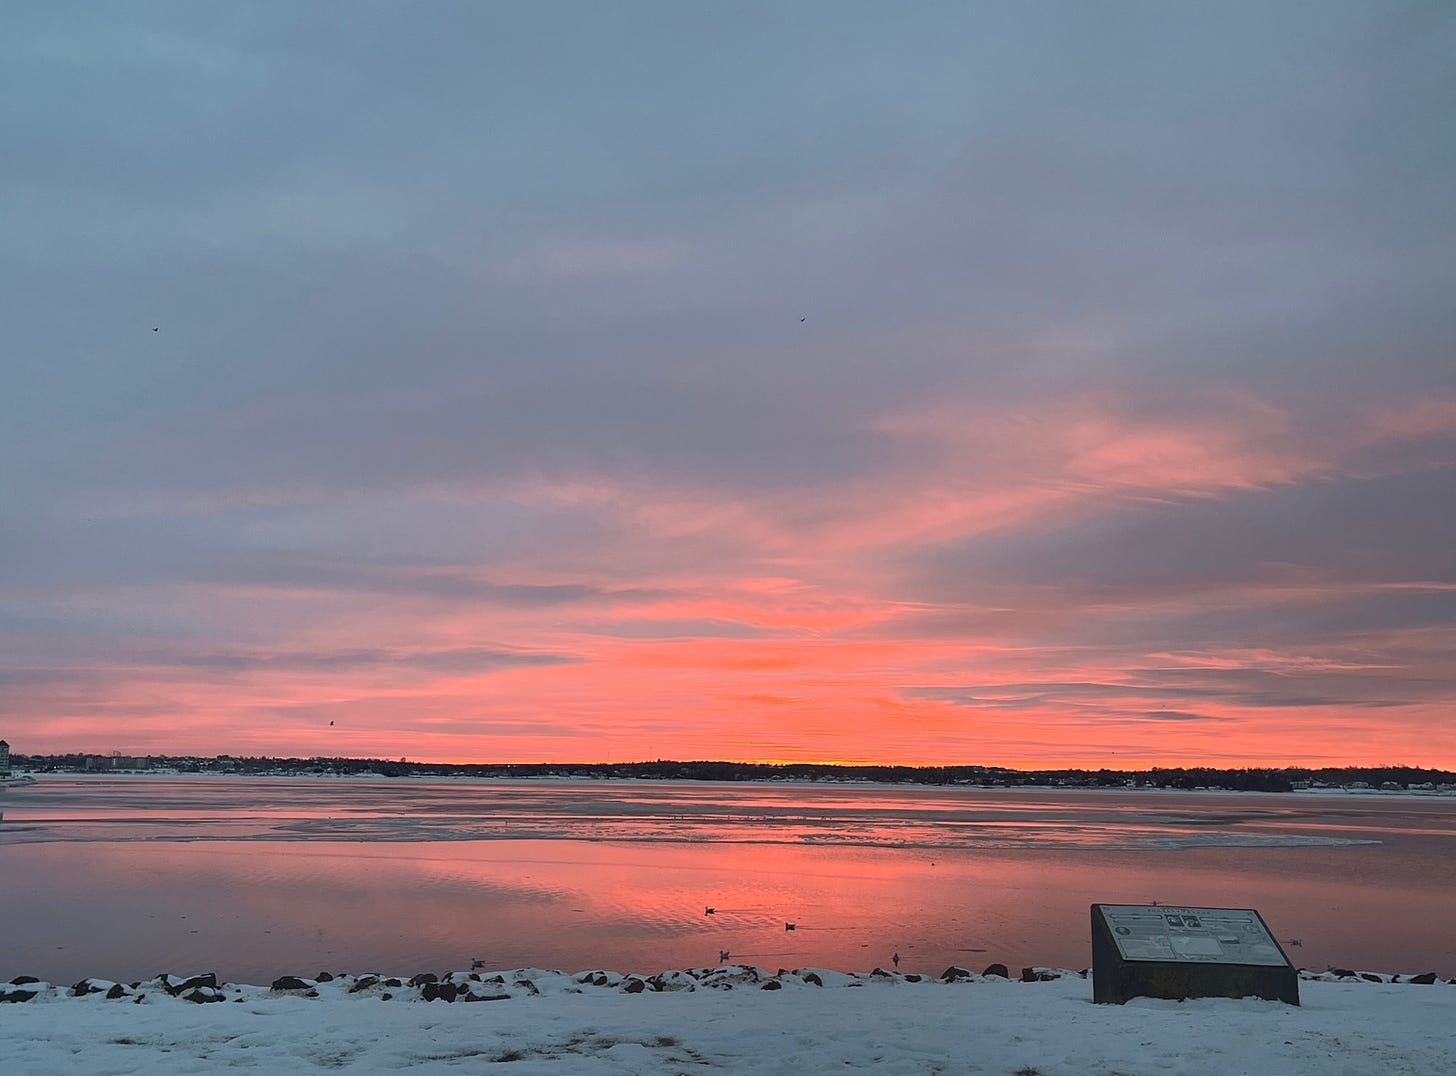 A striking red and grey sky looking south over the water in Charlottetown.